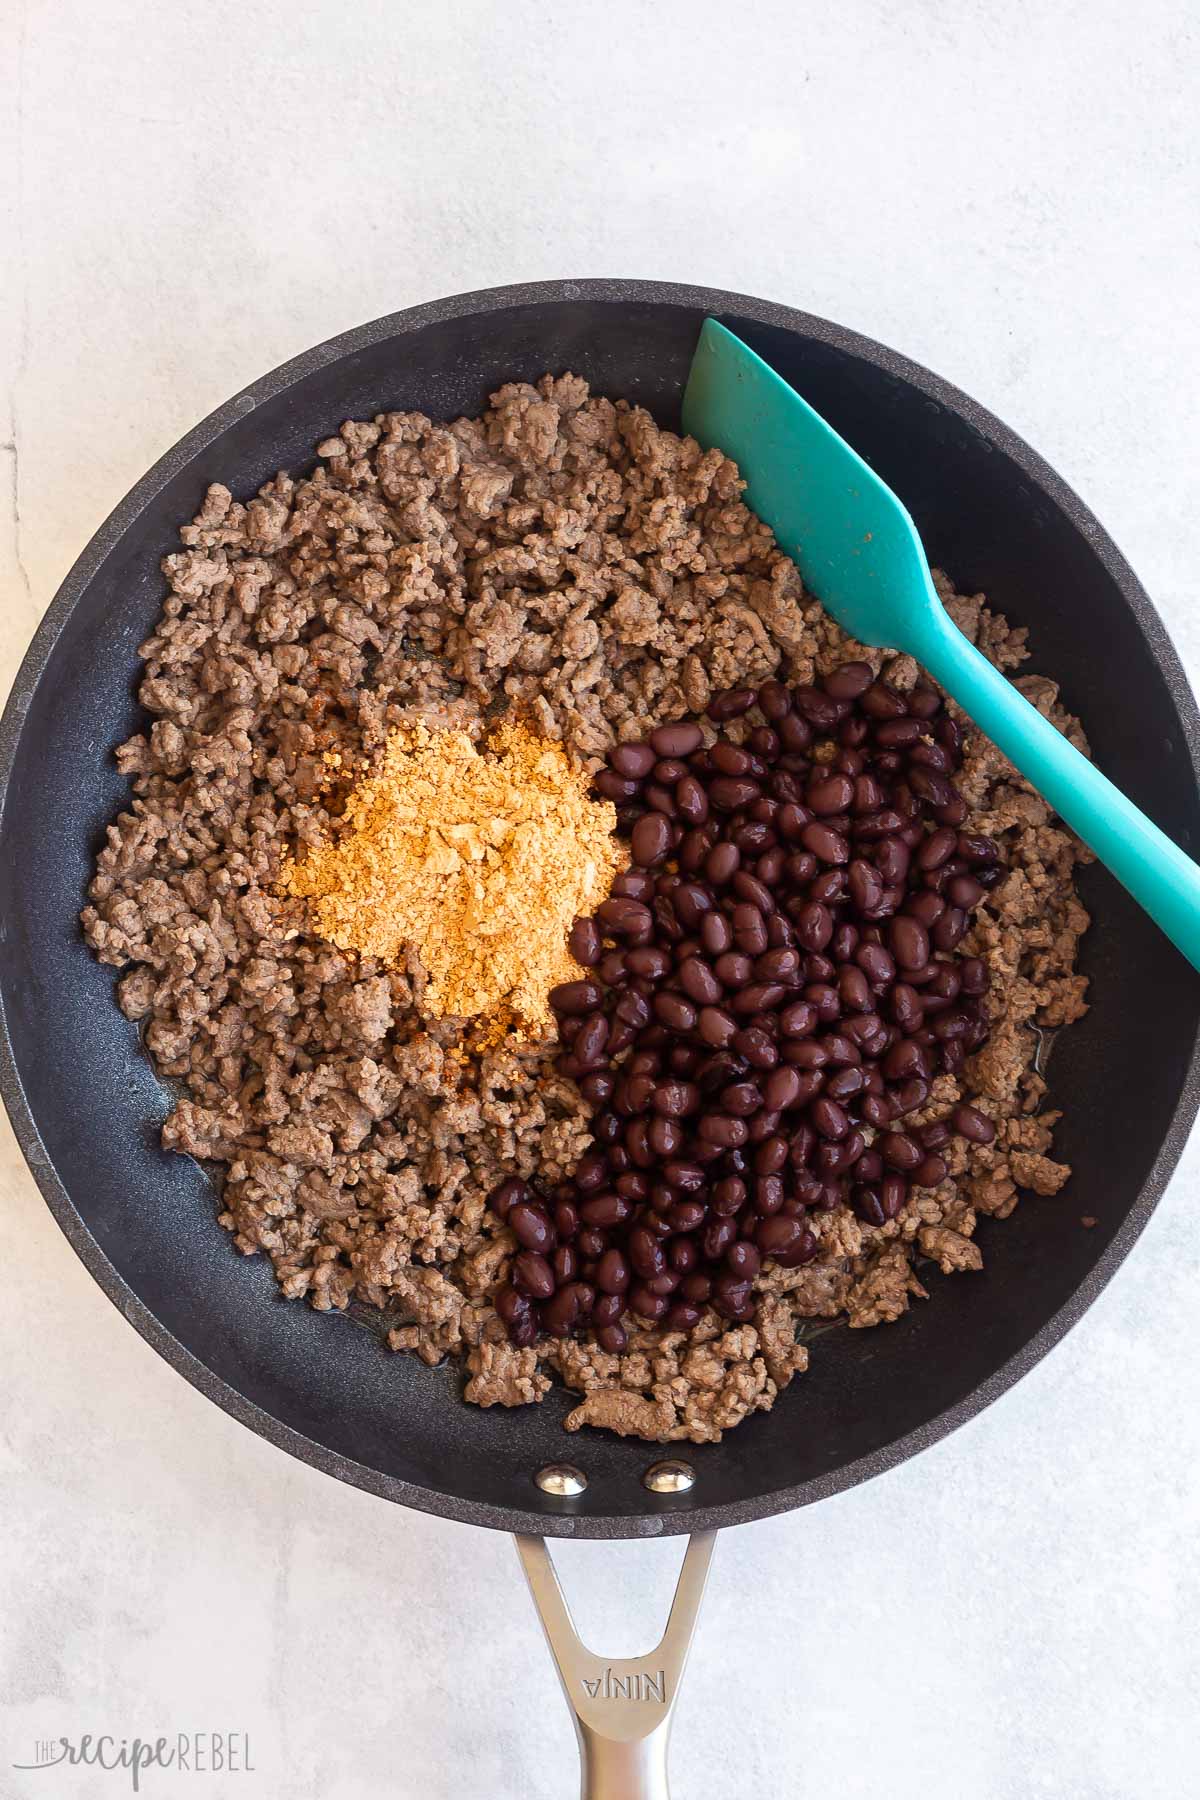 taco seasoning and beans added to cooked ground beef in skillet